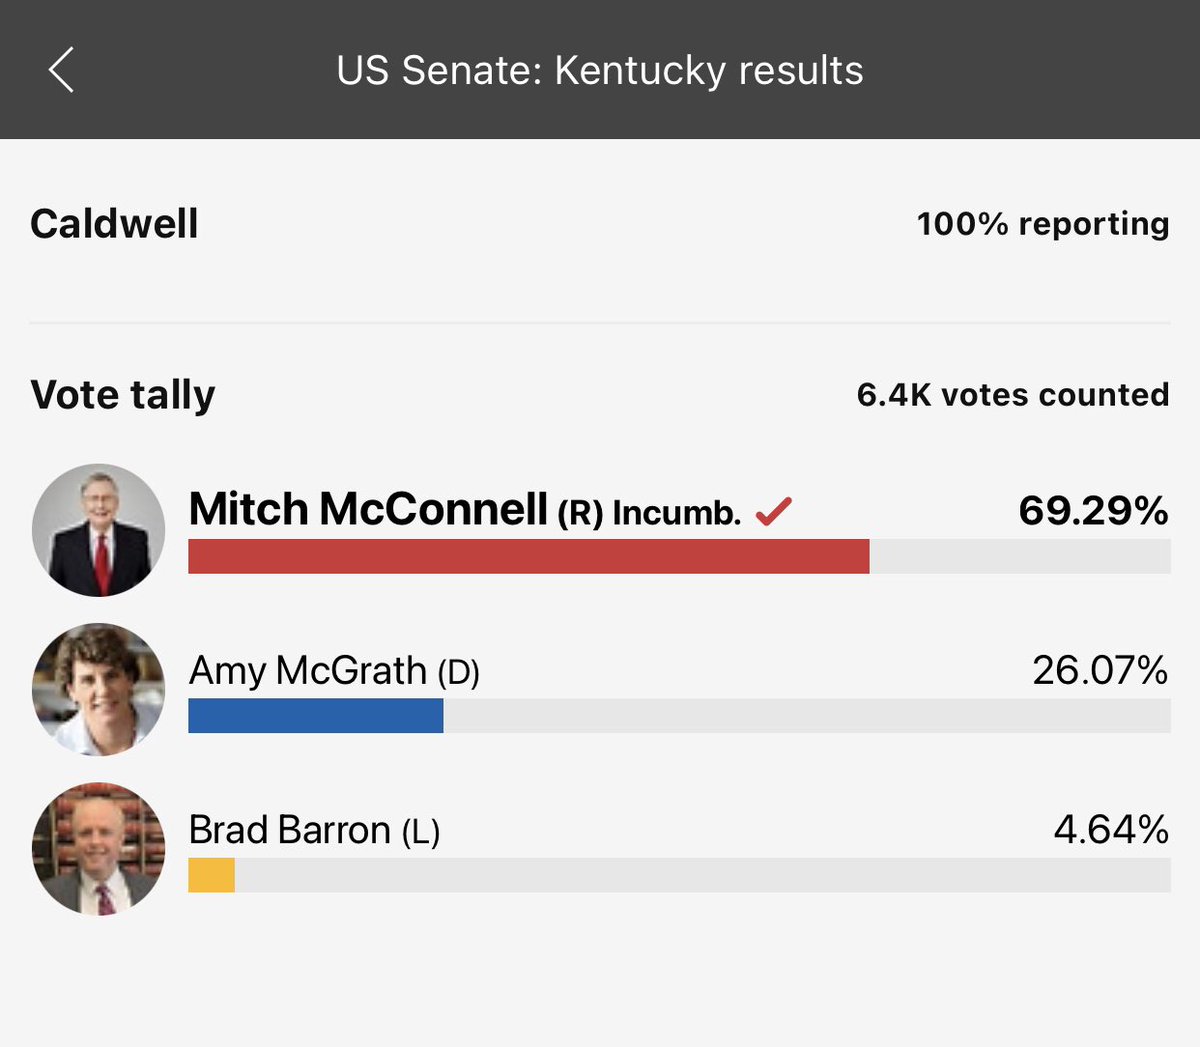 CALDWELL - Mitch won 69.29% of 6,400 voters - roughly 4,435 votes. There are 3,857 registered Republicans, 5,805 Democrats, & 632 other